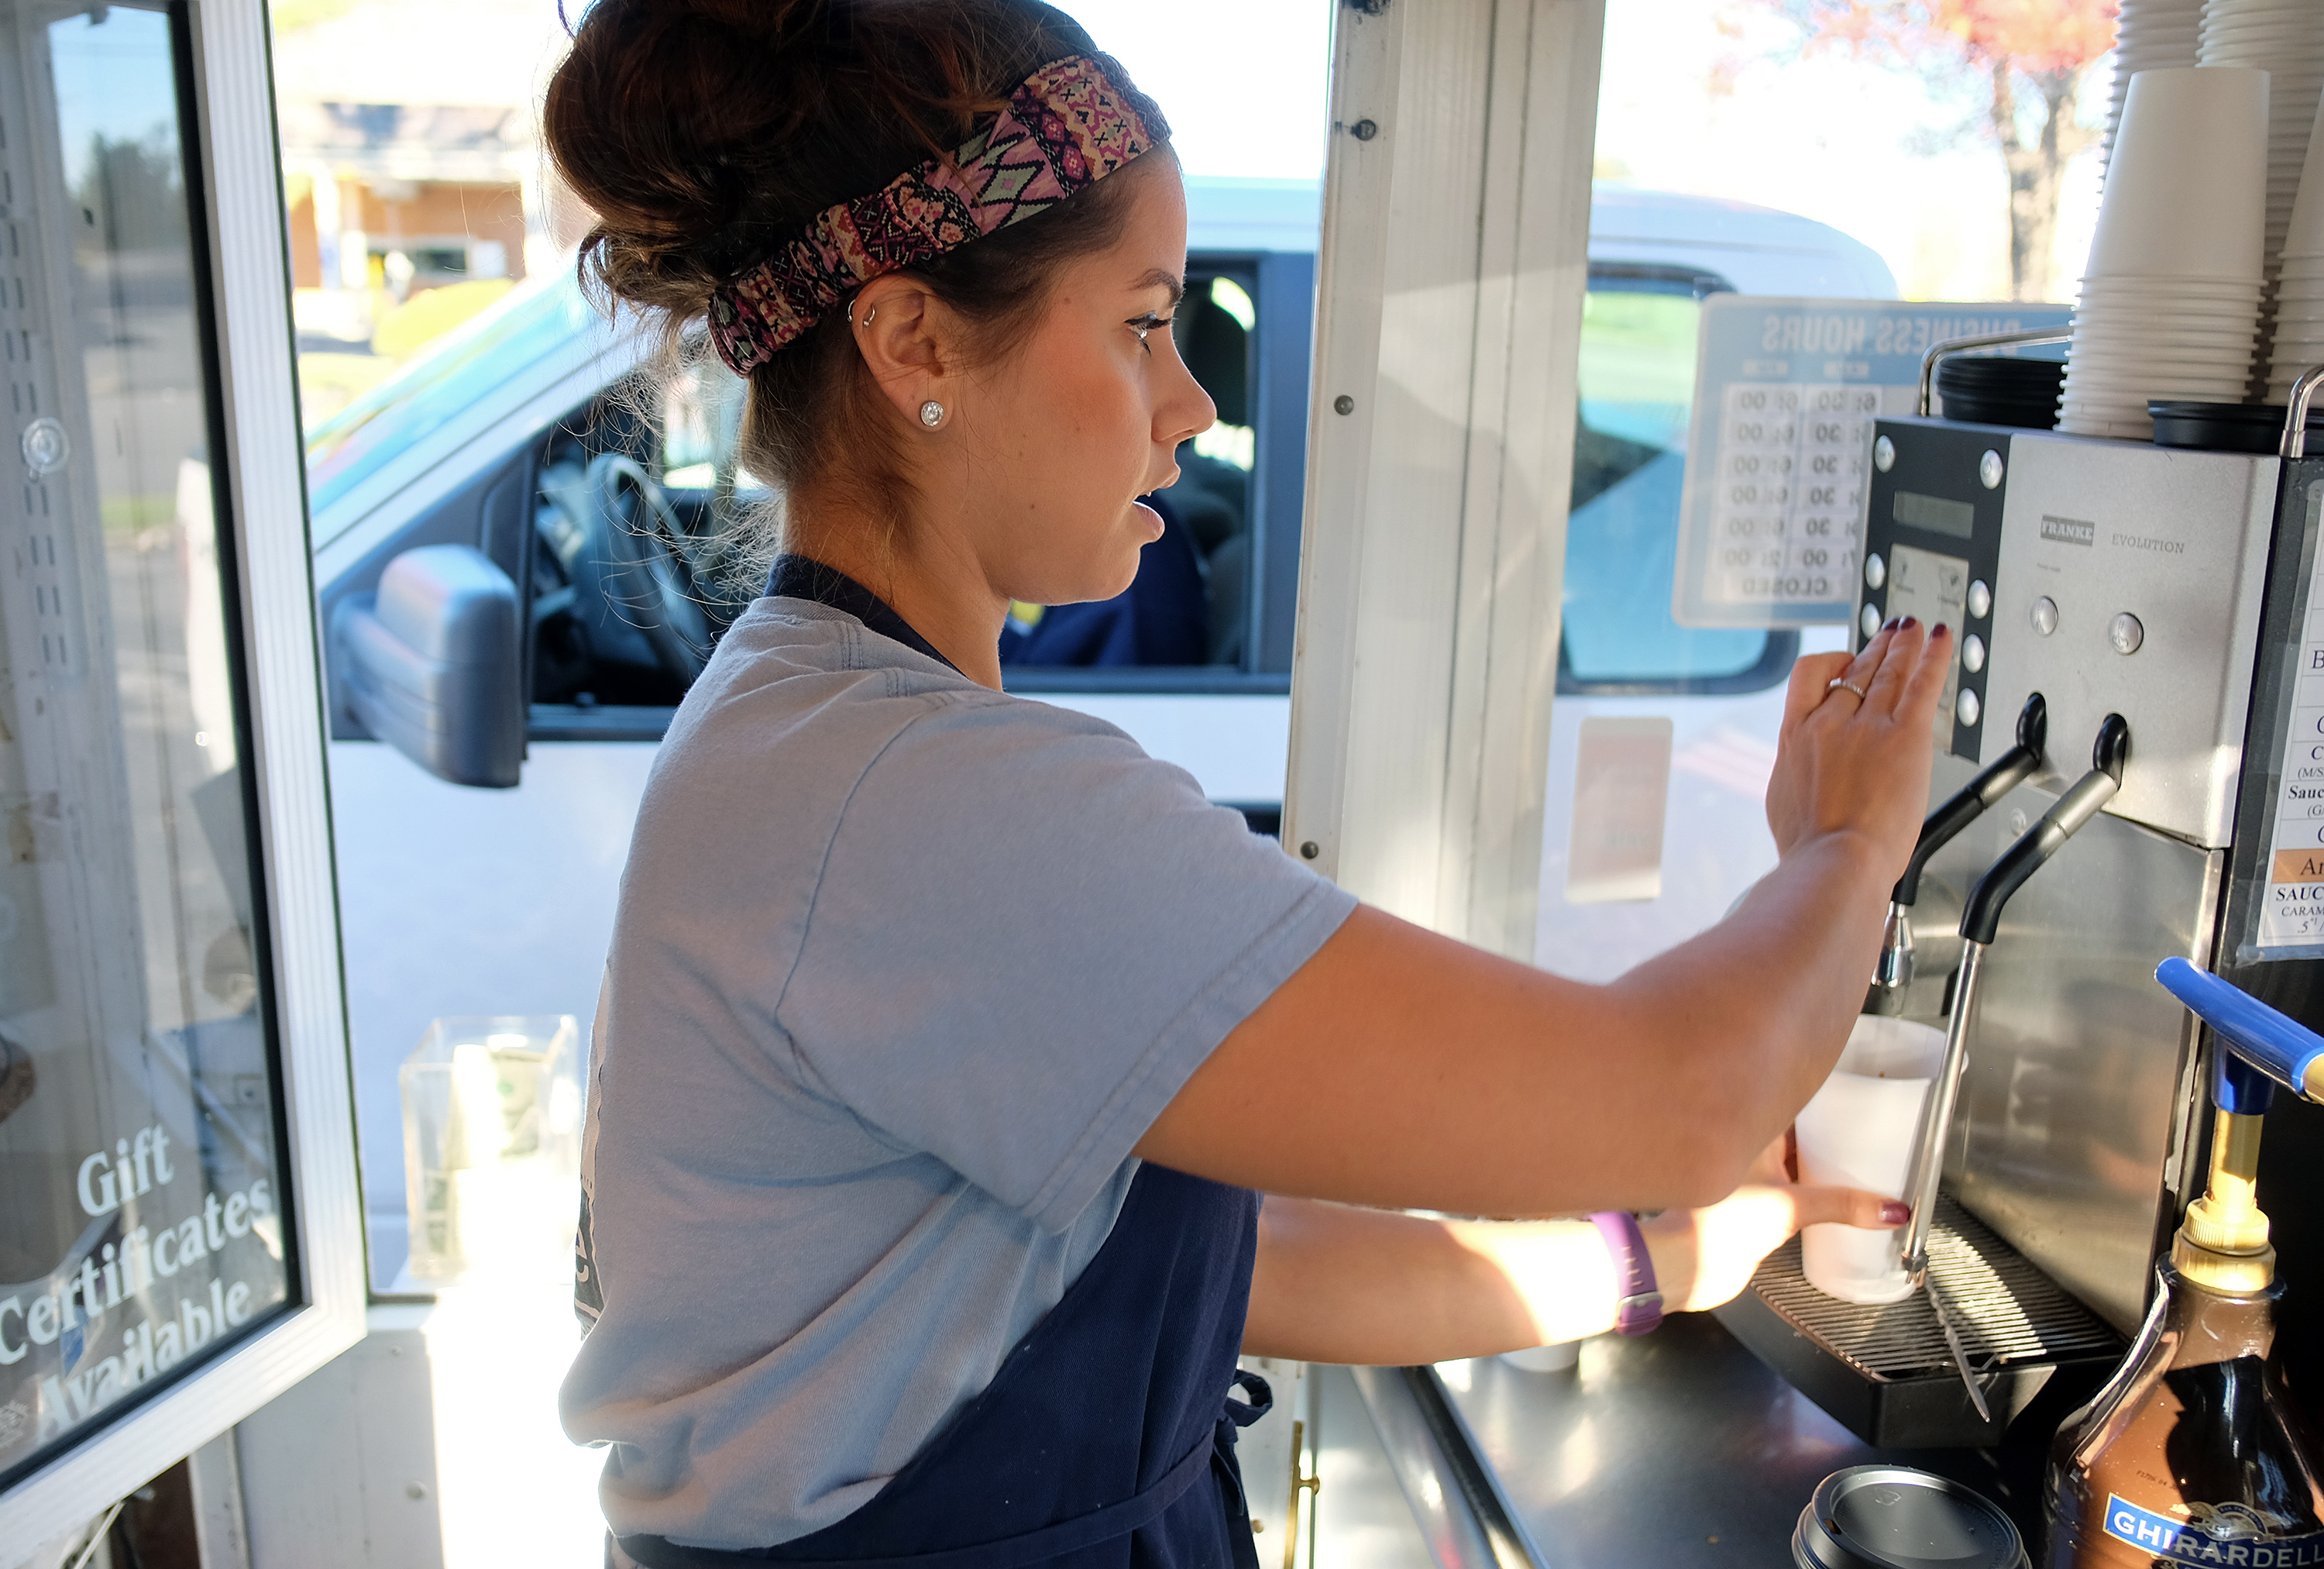 Kelsey Shreckhise, manager of Micah's Coffee helps a customer in Waynesboro, Va. Thursday Nov. 10, 2016. (Photo by Norm Shafer).